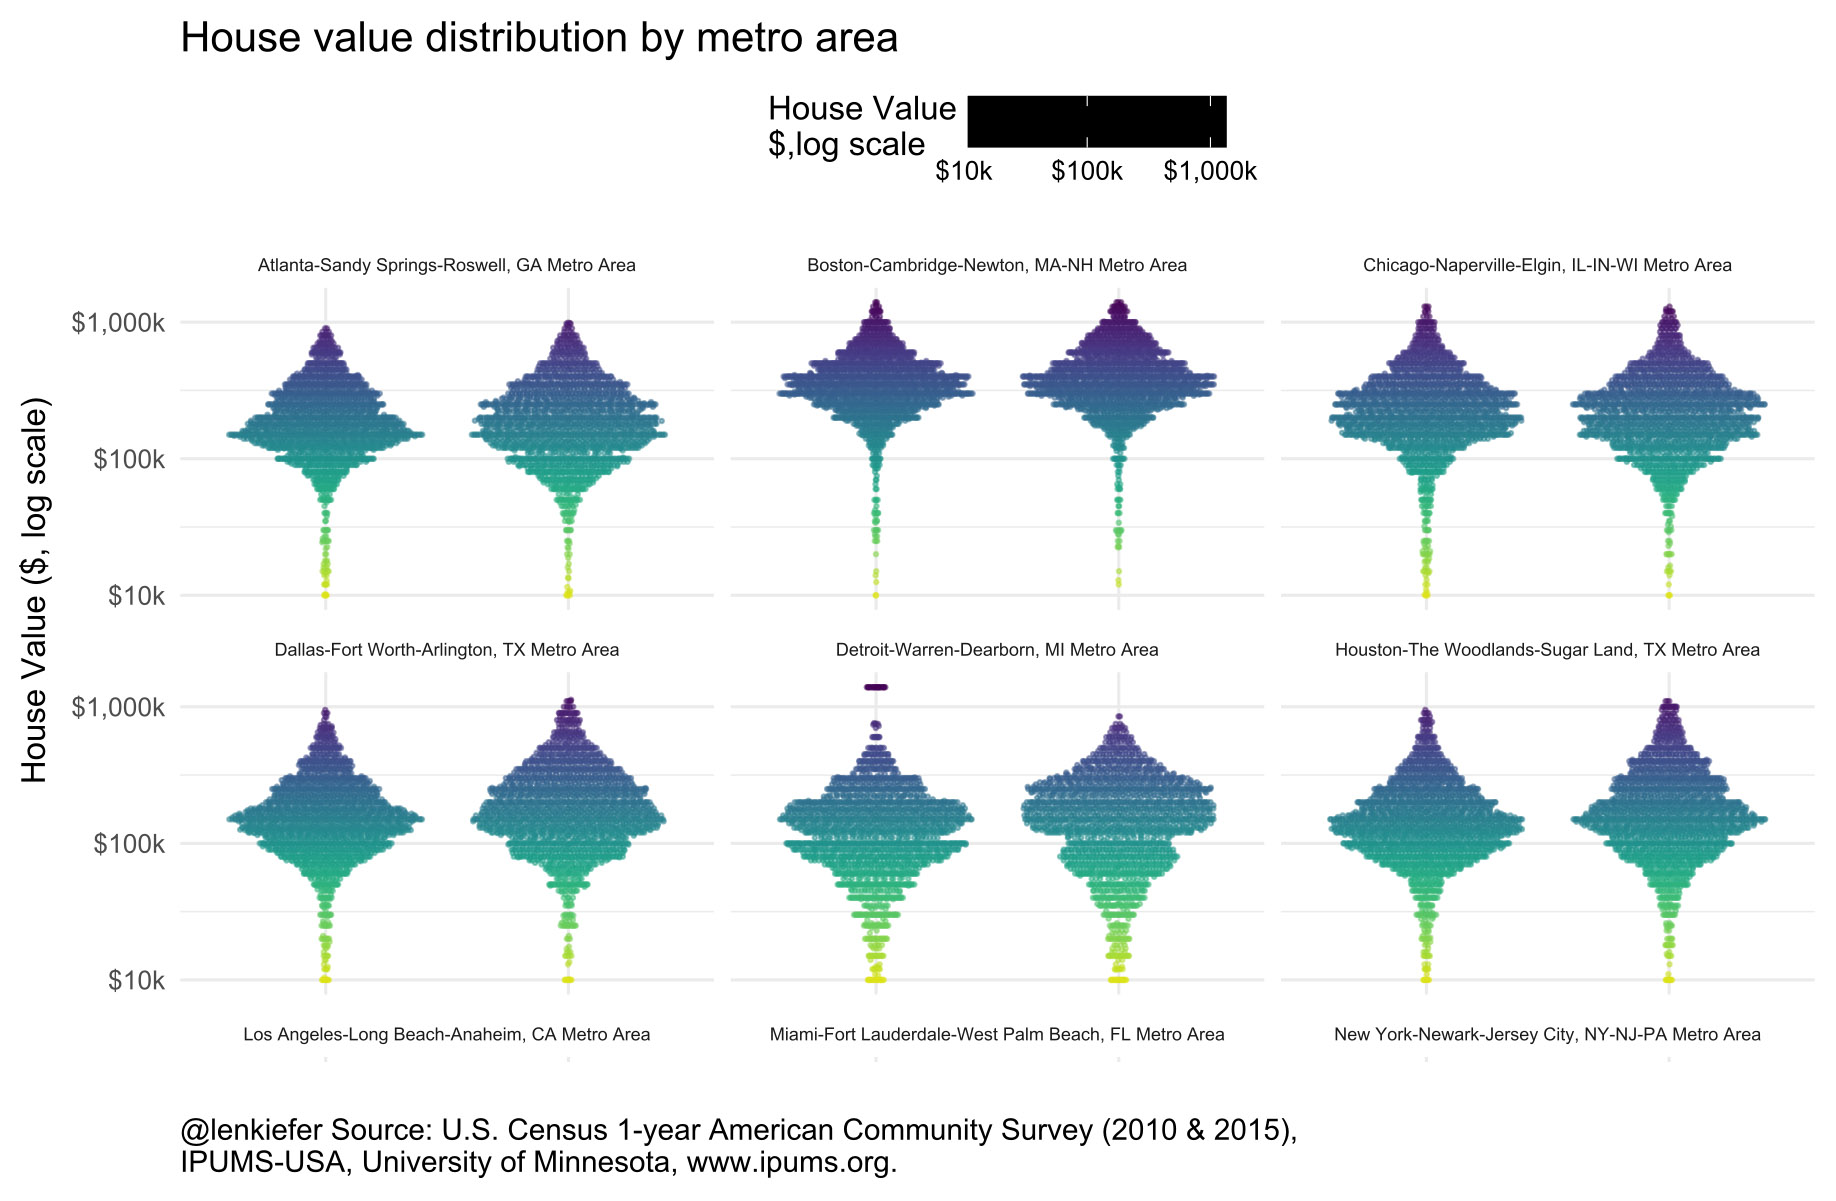 Visualizing housing value distributions by metro